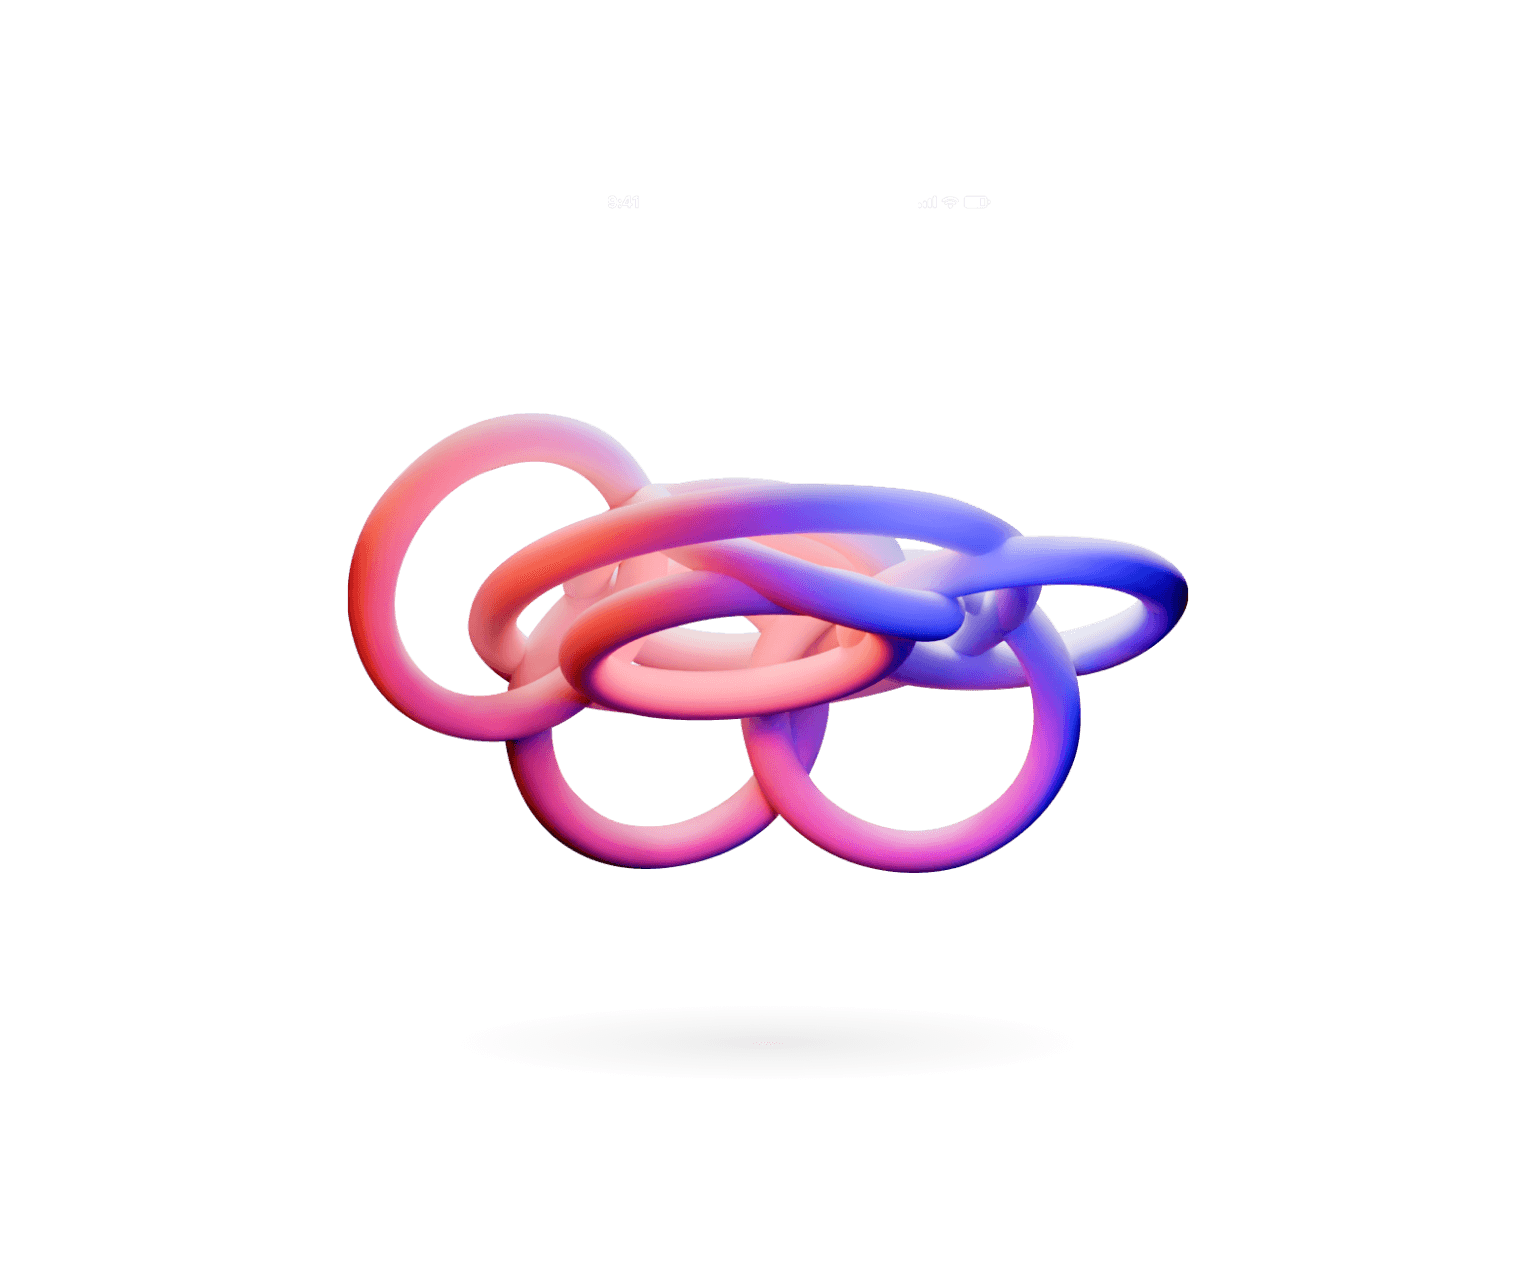 3D render of a chain of connected links